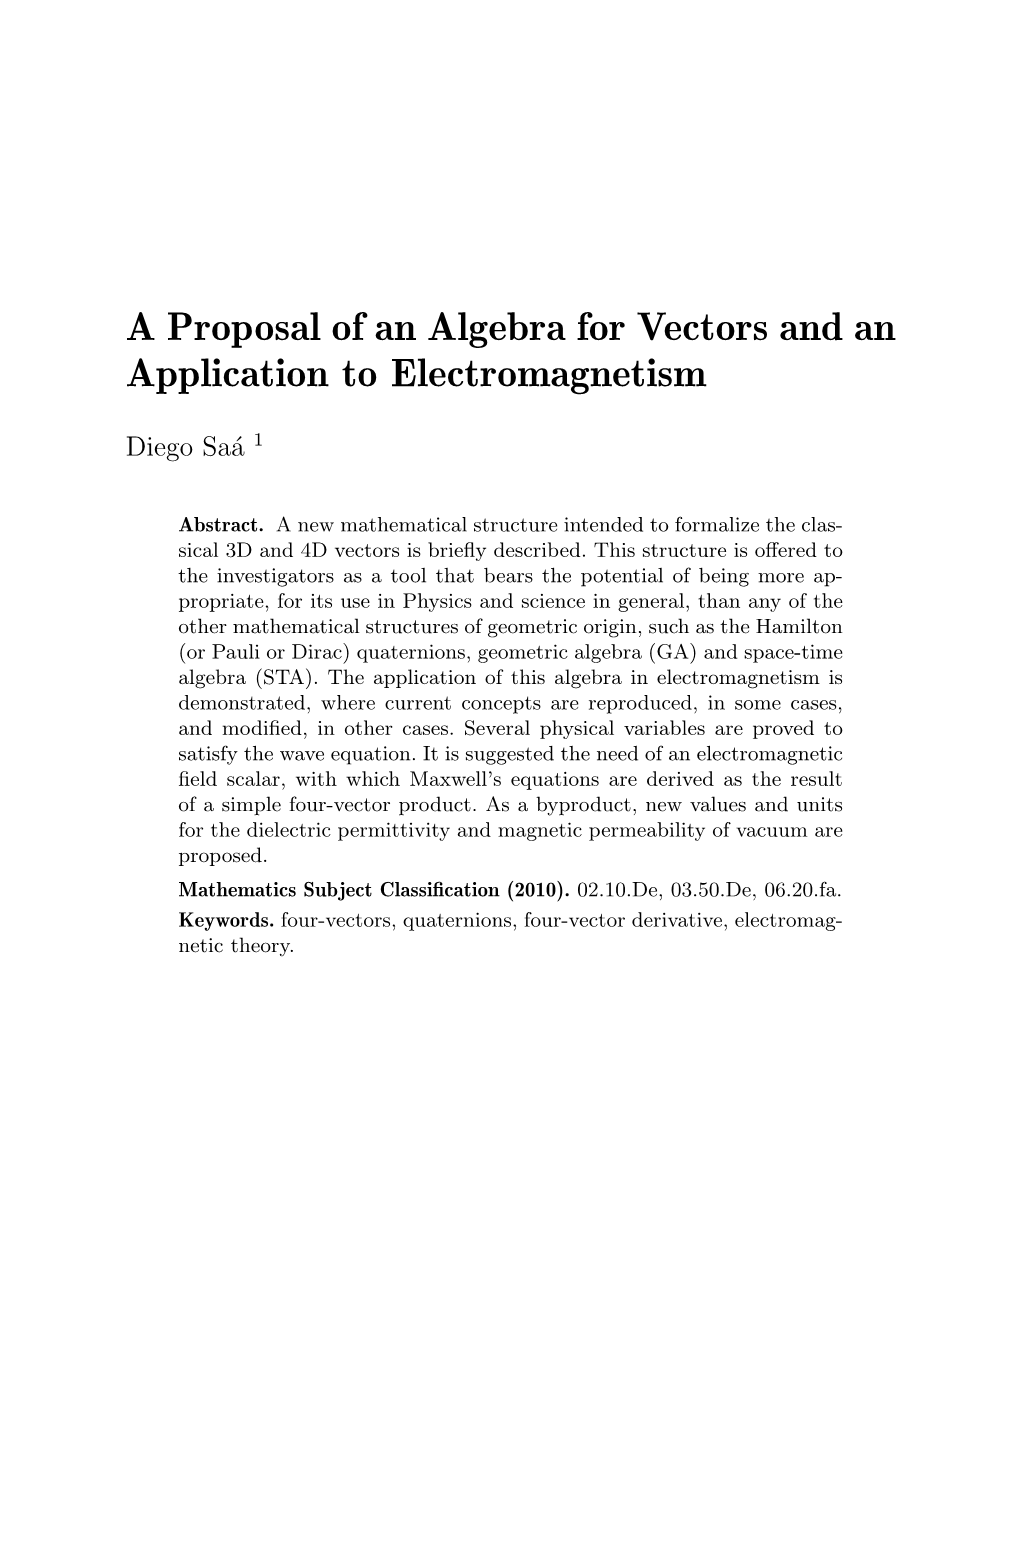 A Proposal of an Algebra for Vectors and an Application to Electromagnetism